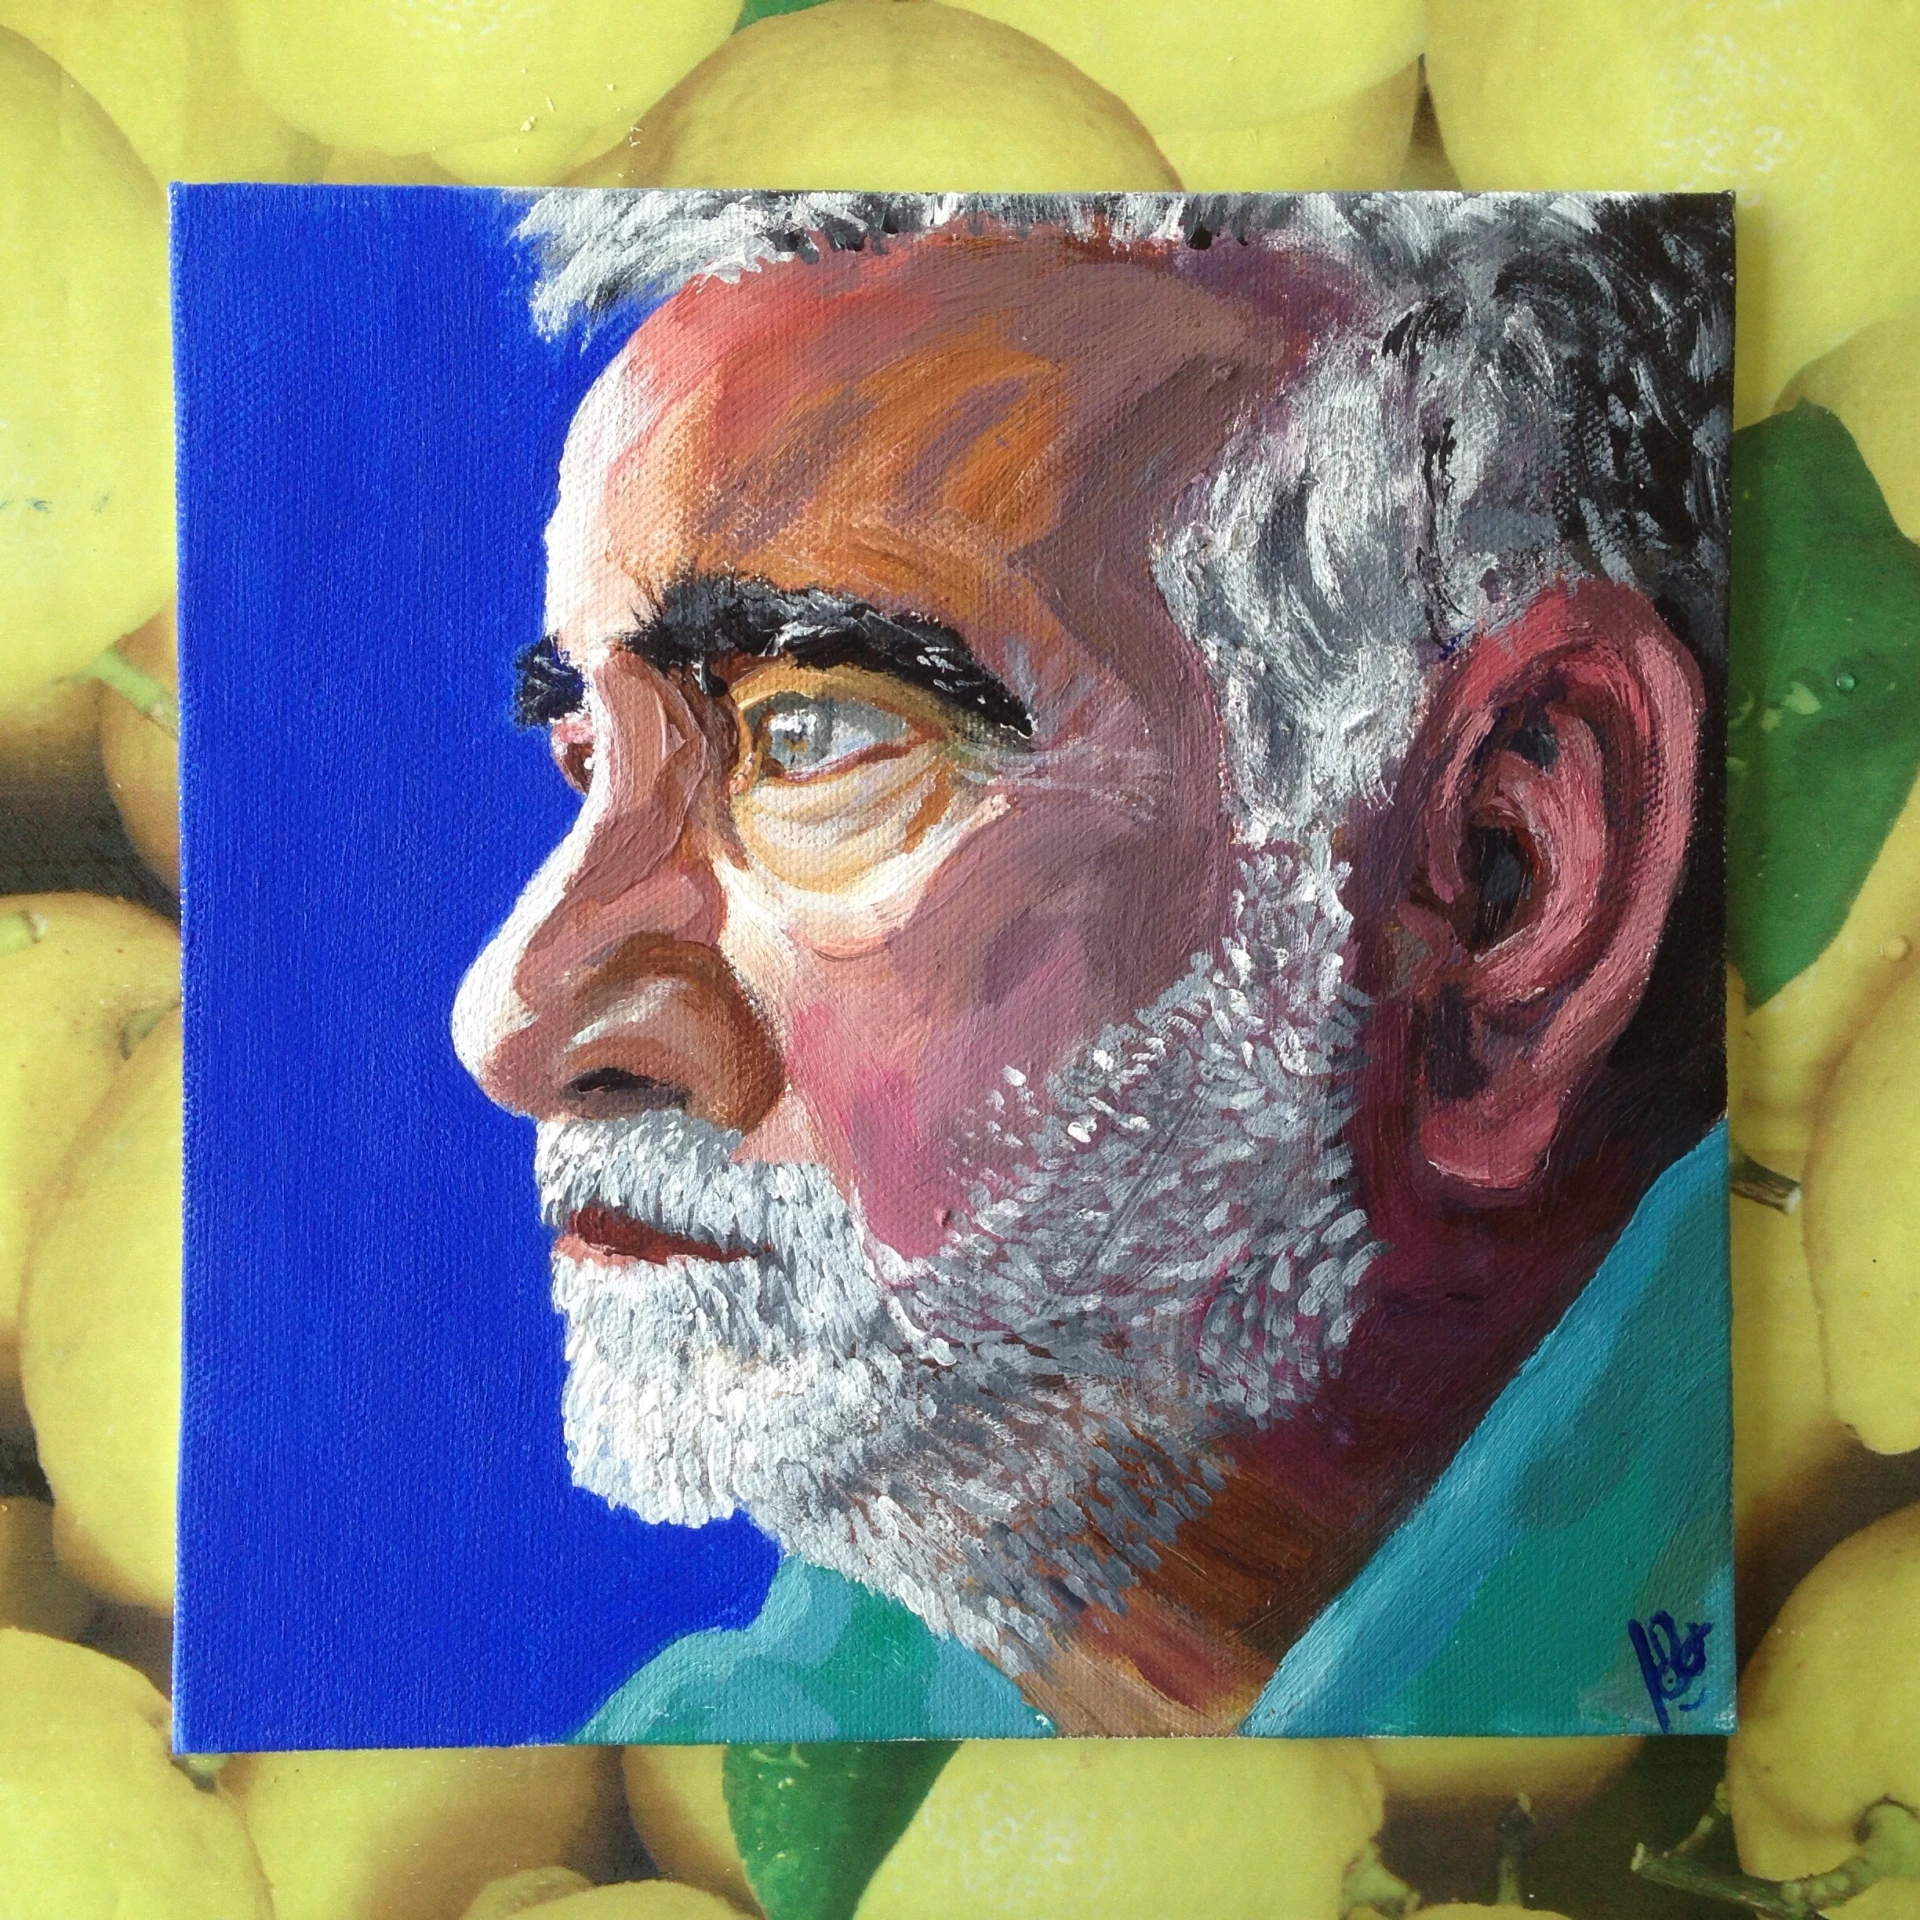 an oil painting of a man's face and shoulders, next to apples